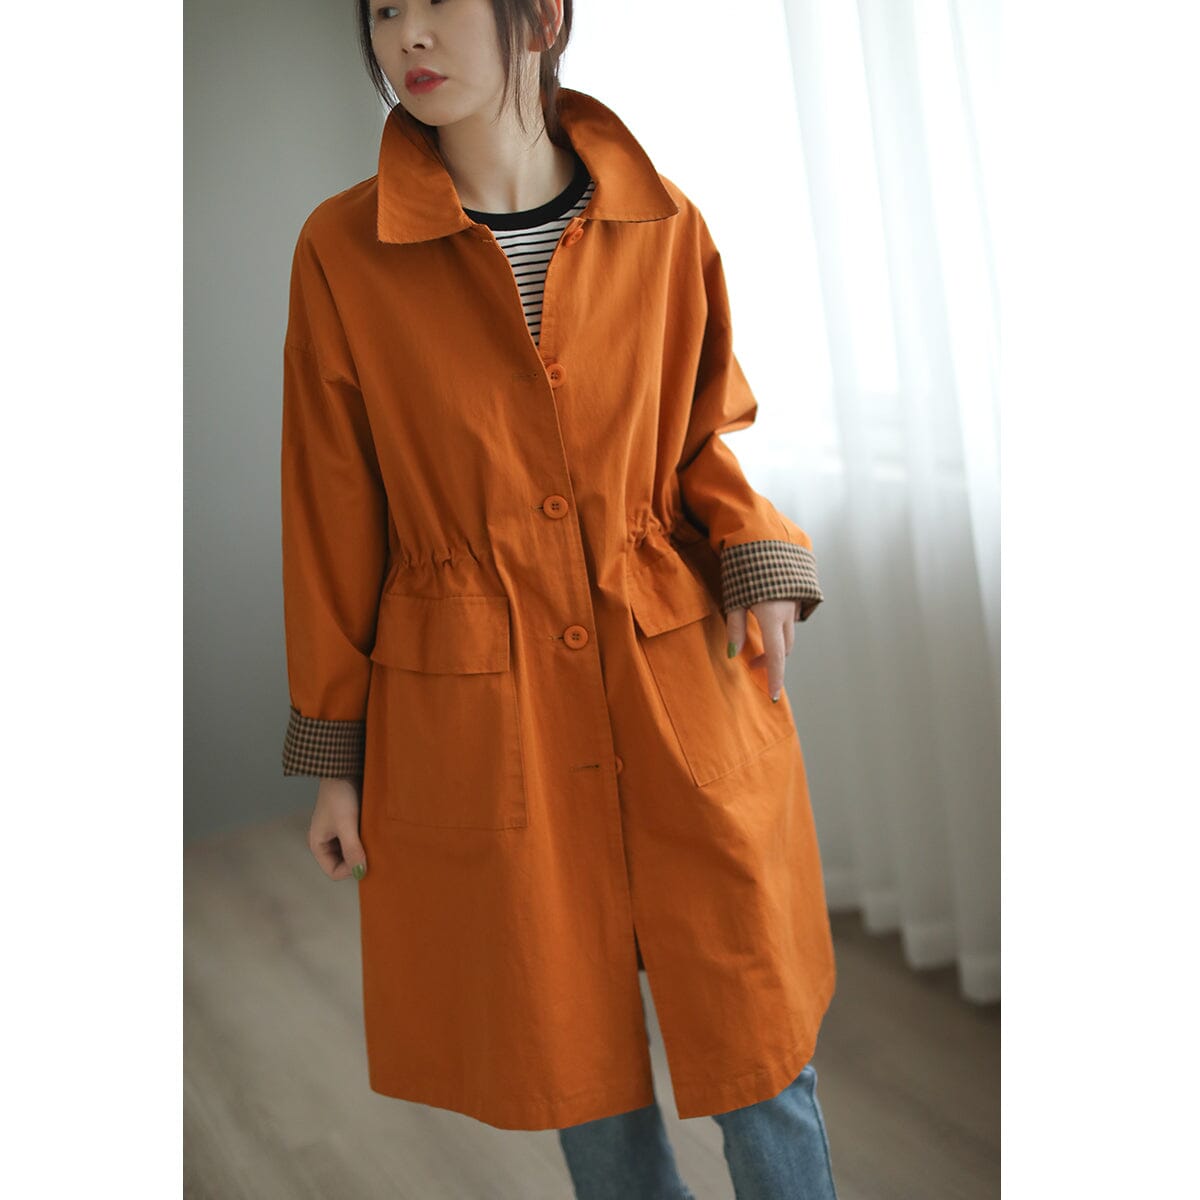 Women Spring Loose Casual Overlength Jacket Feb 2023 New Arrival One Size Orange 